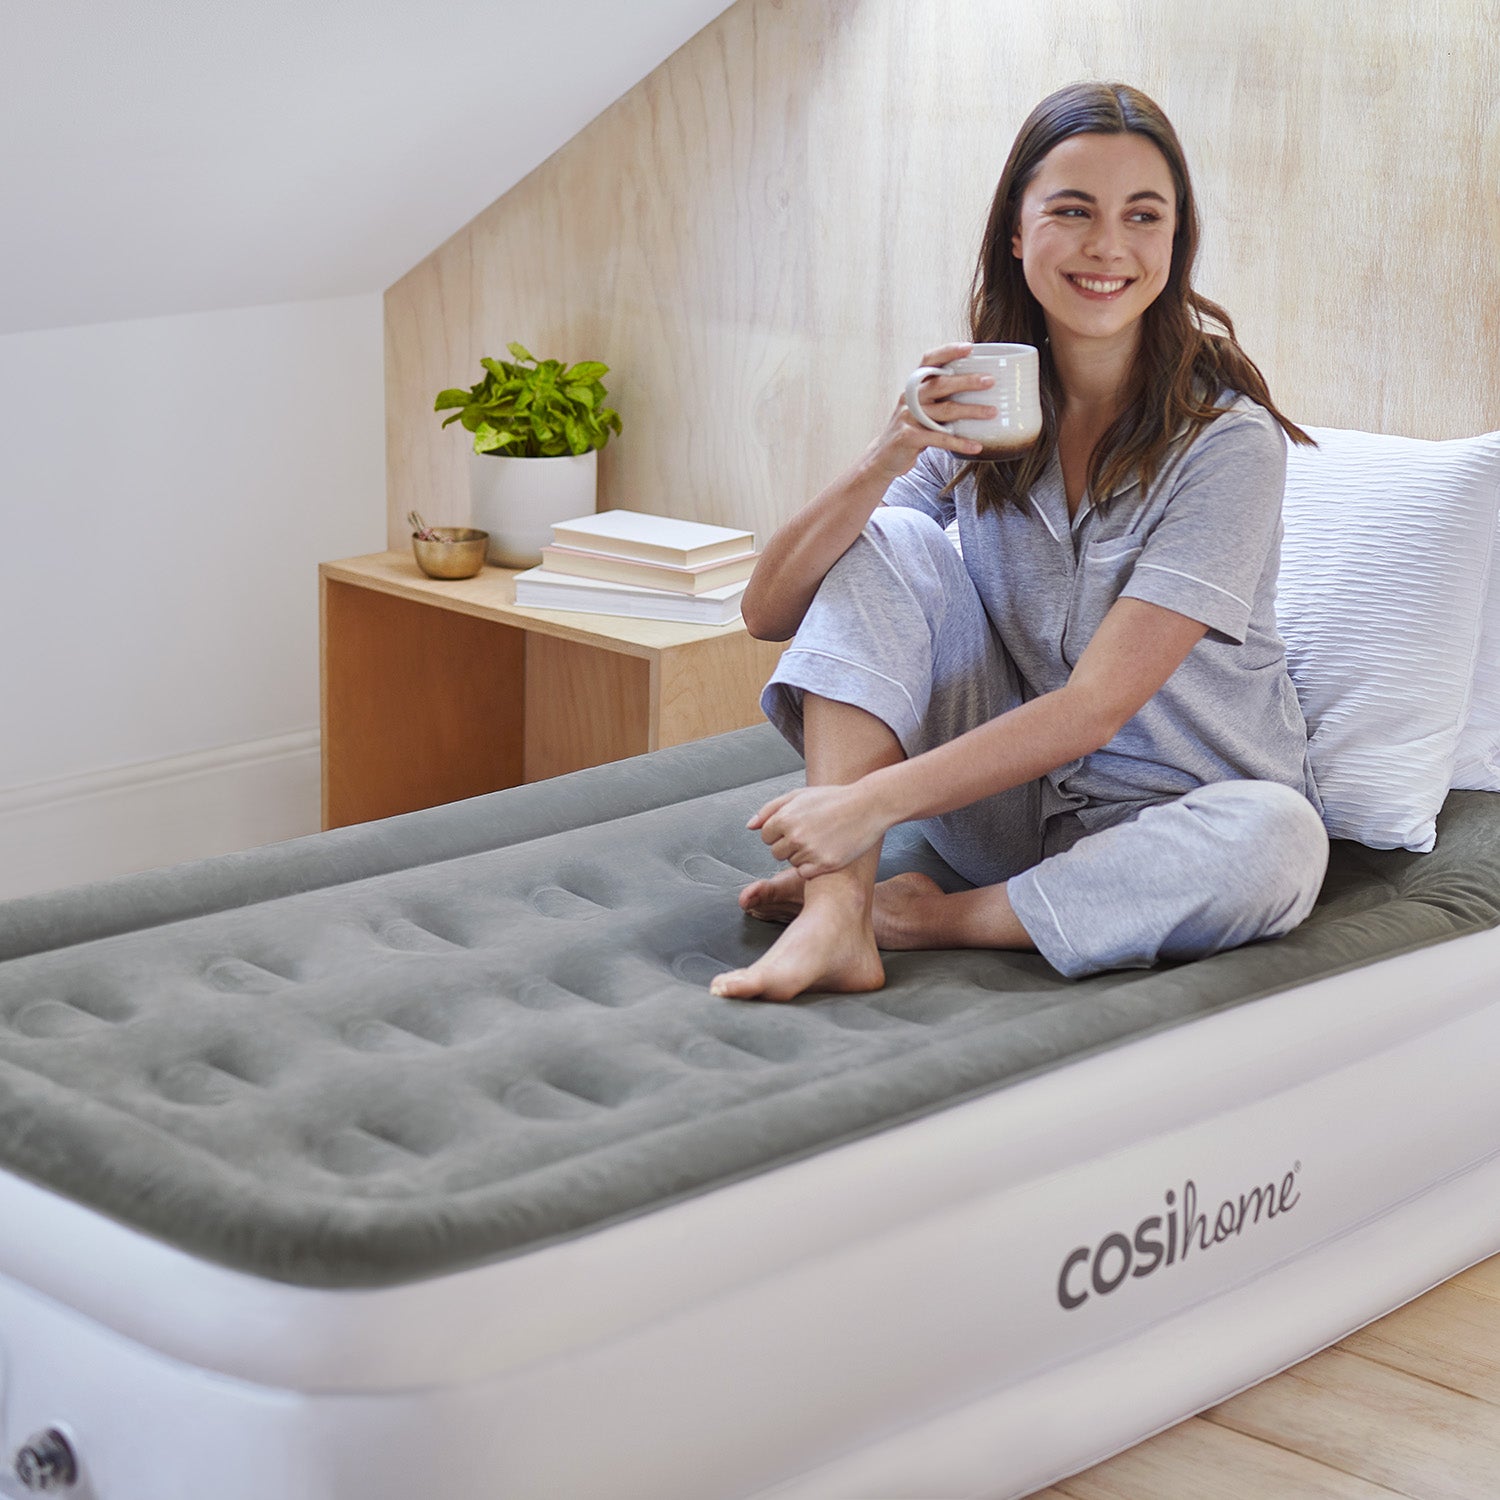 Single Size Air Bed - Built-in Electric Pump and Pillow